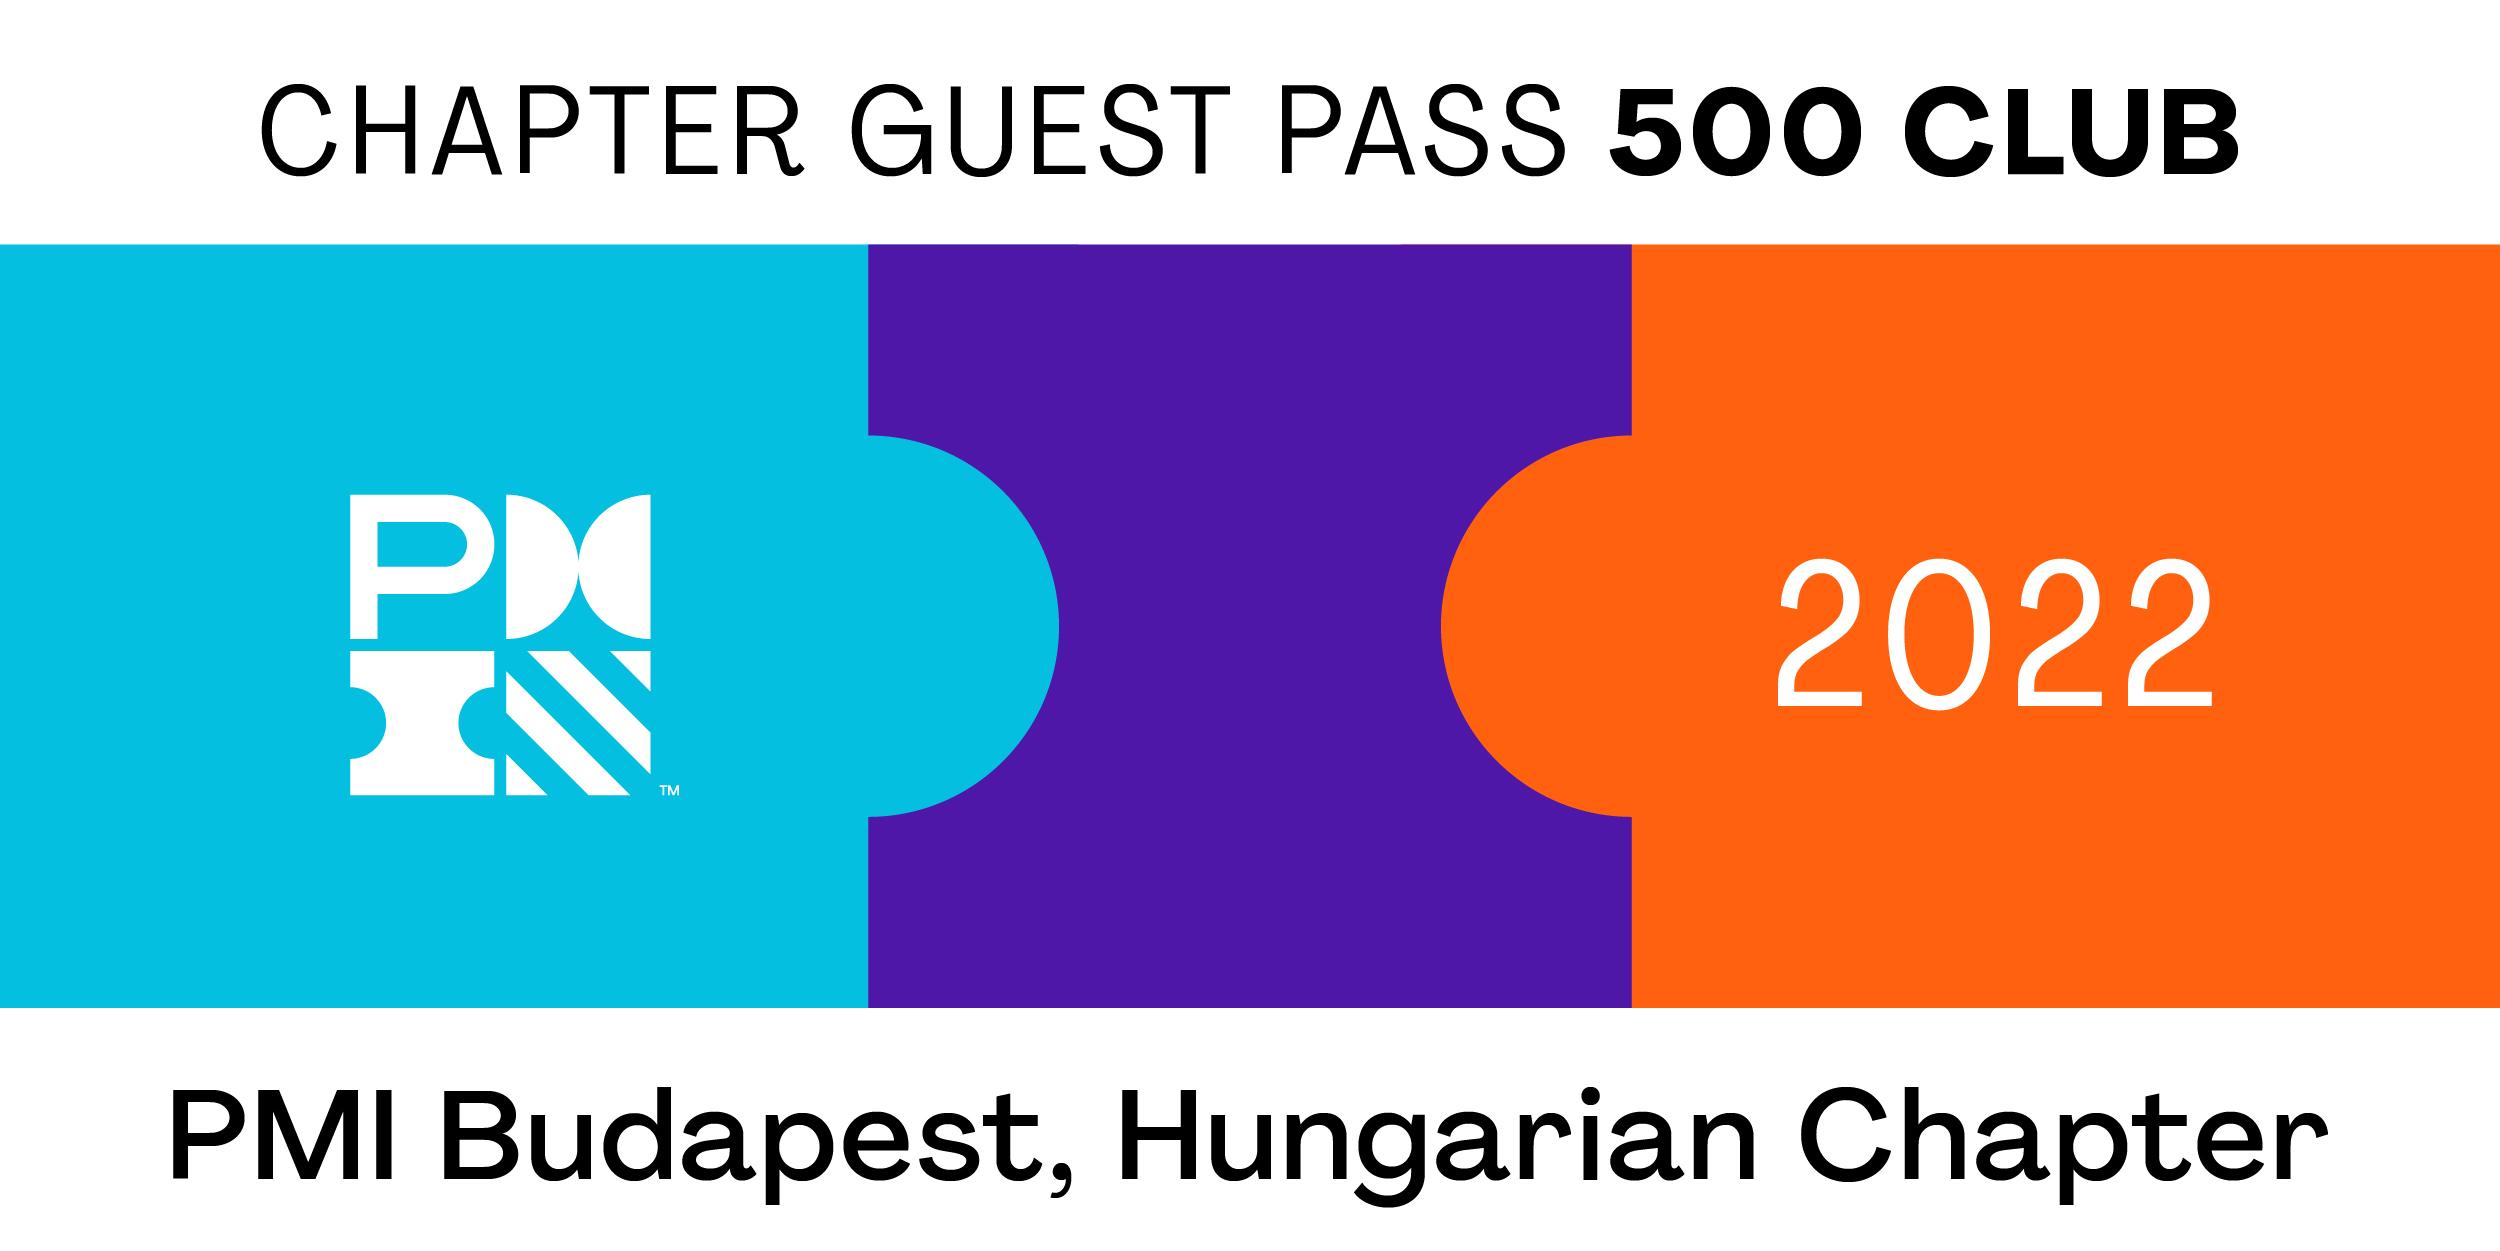 Budapest,-Hungarian-Chapter-2022-Chapter-Guest-Pass-Web-Badge_600-x-300-copy.jpg